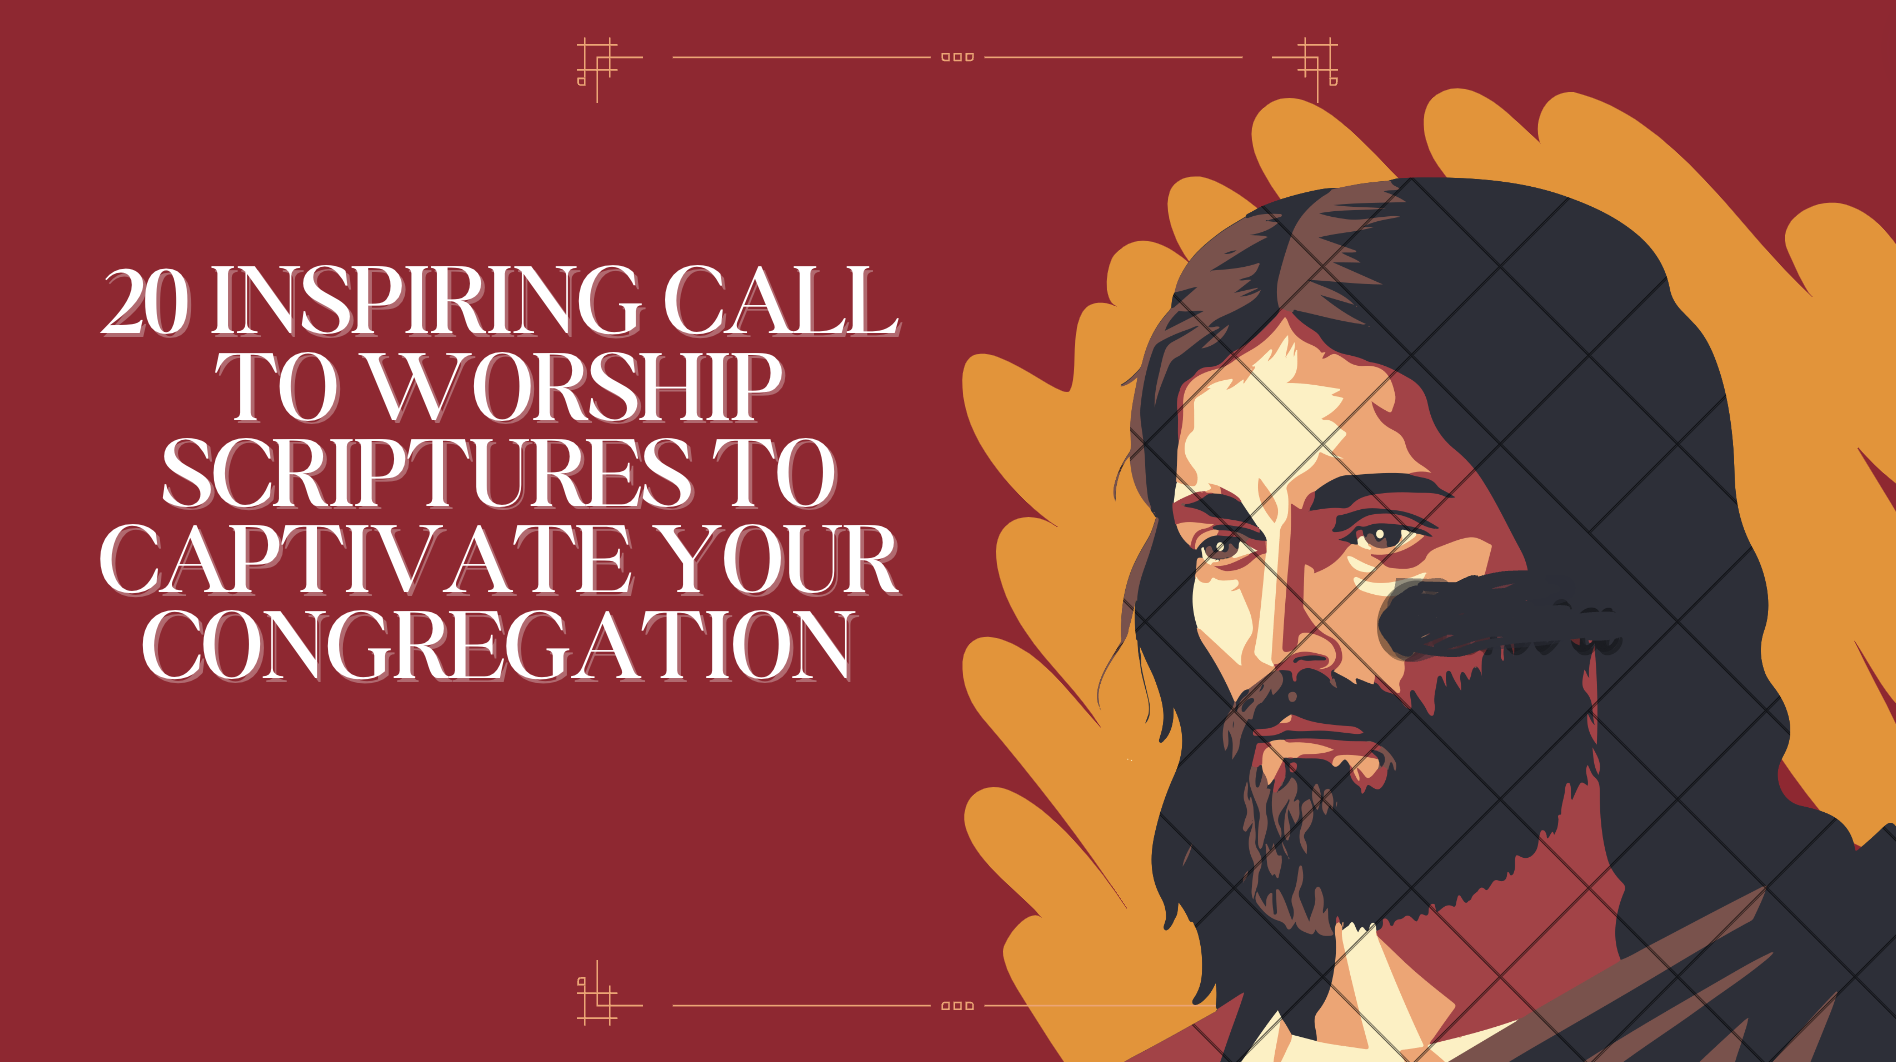 20 Inspiring Call to Worship Scriptures to Captivate your Congregation